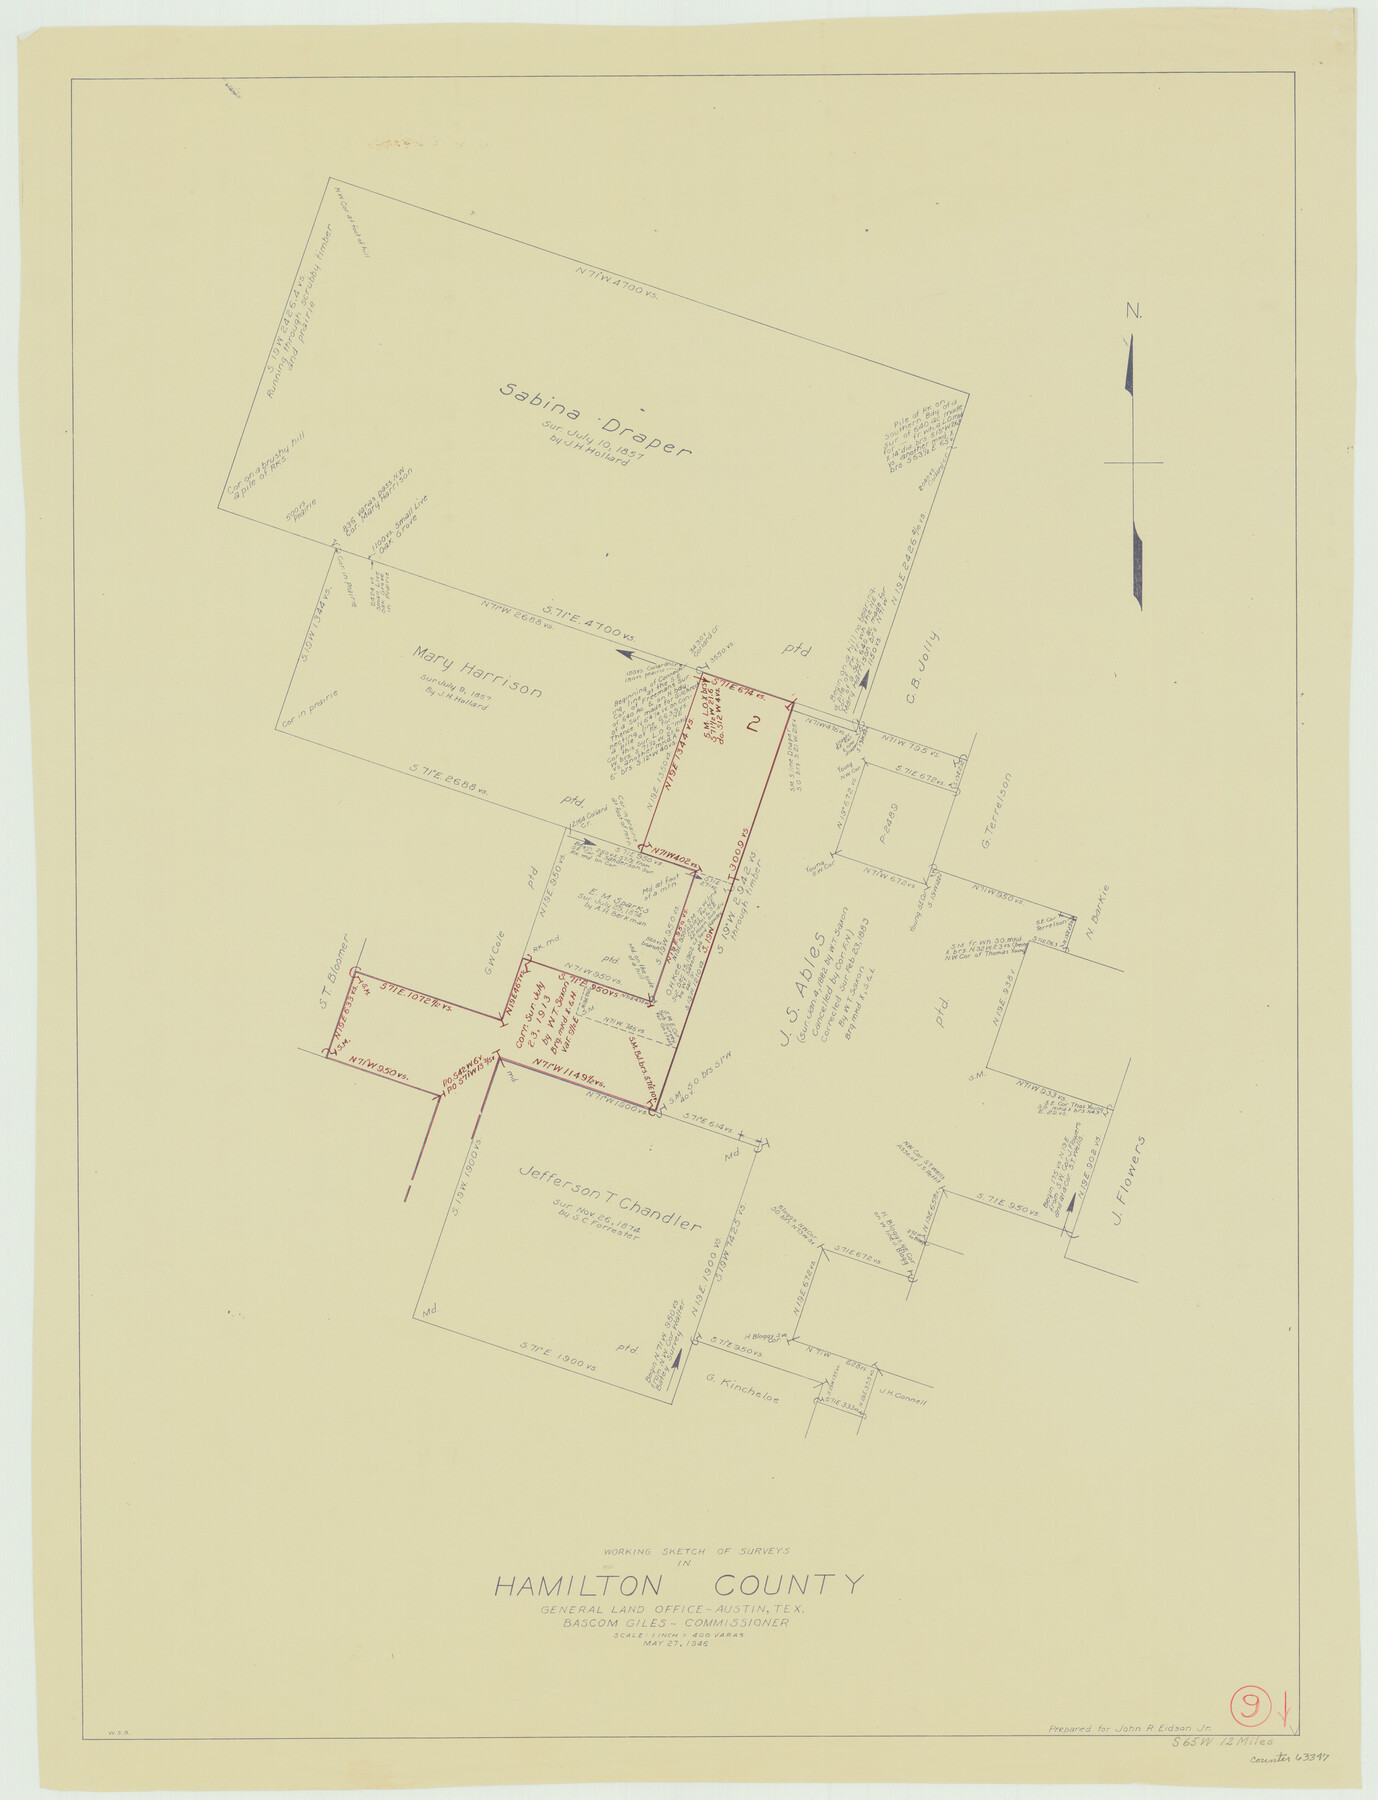 63347, Hamilton County Working Sketch 9, General Map Collection